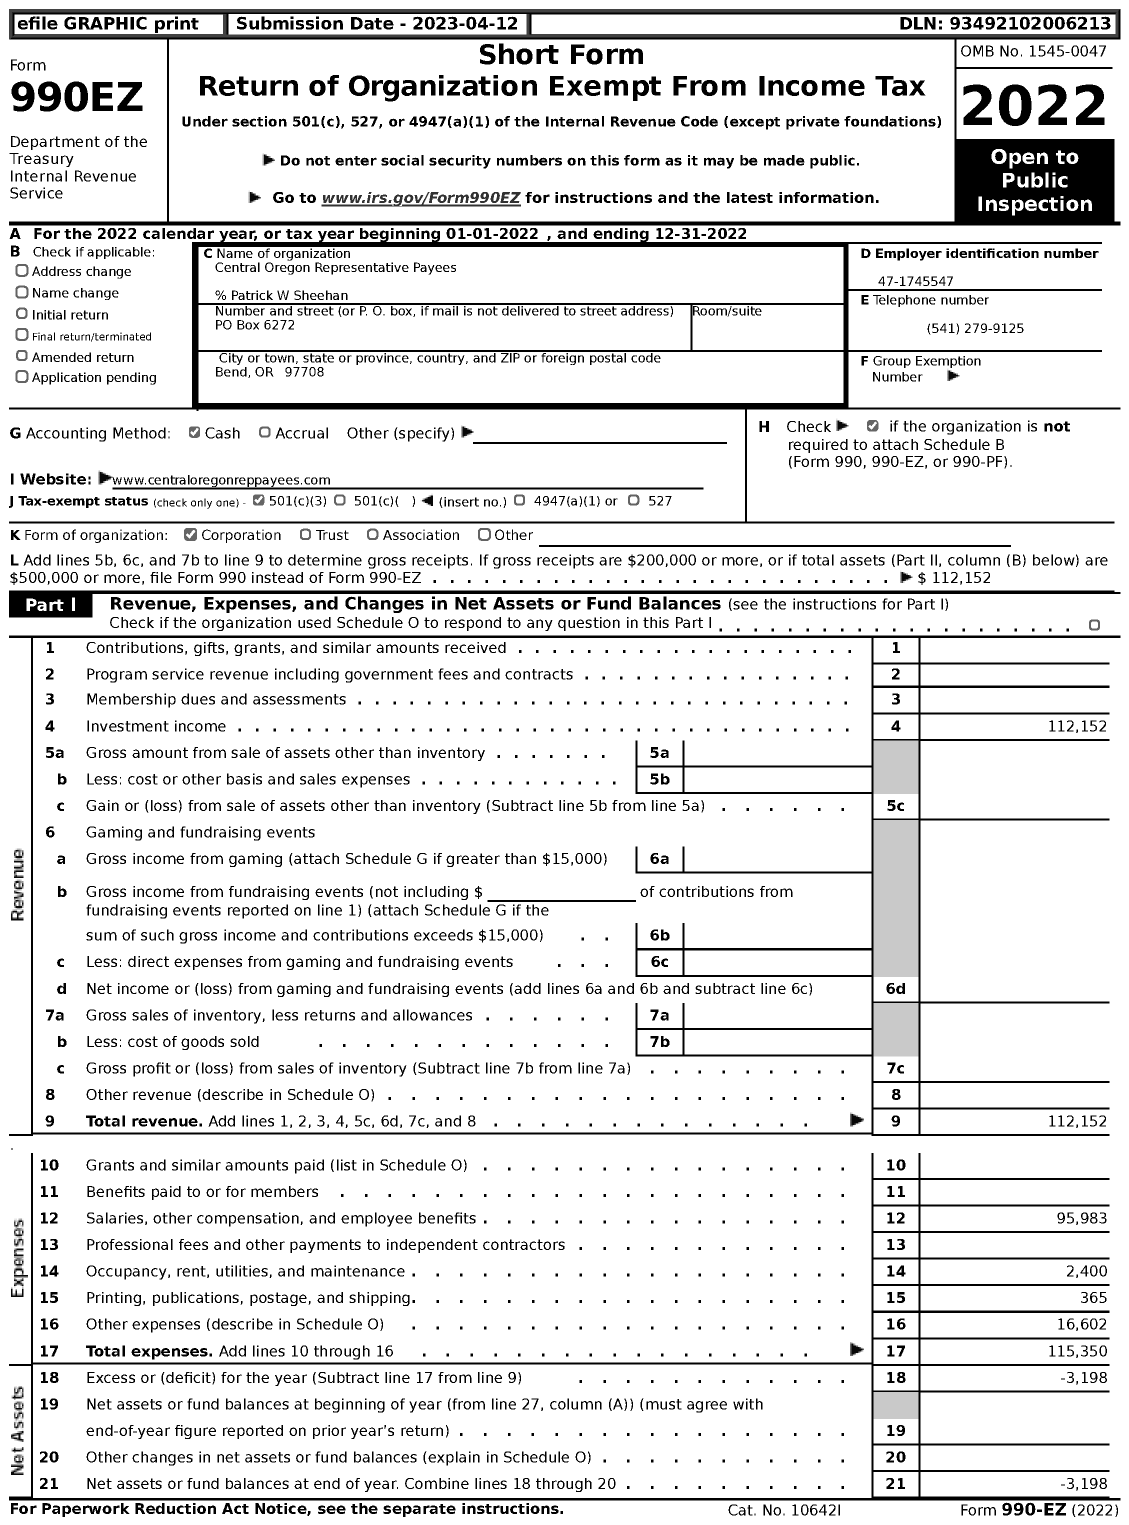 Image of first page of 2022 Form 990EZ for Central Oregon Representative Payees